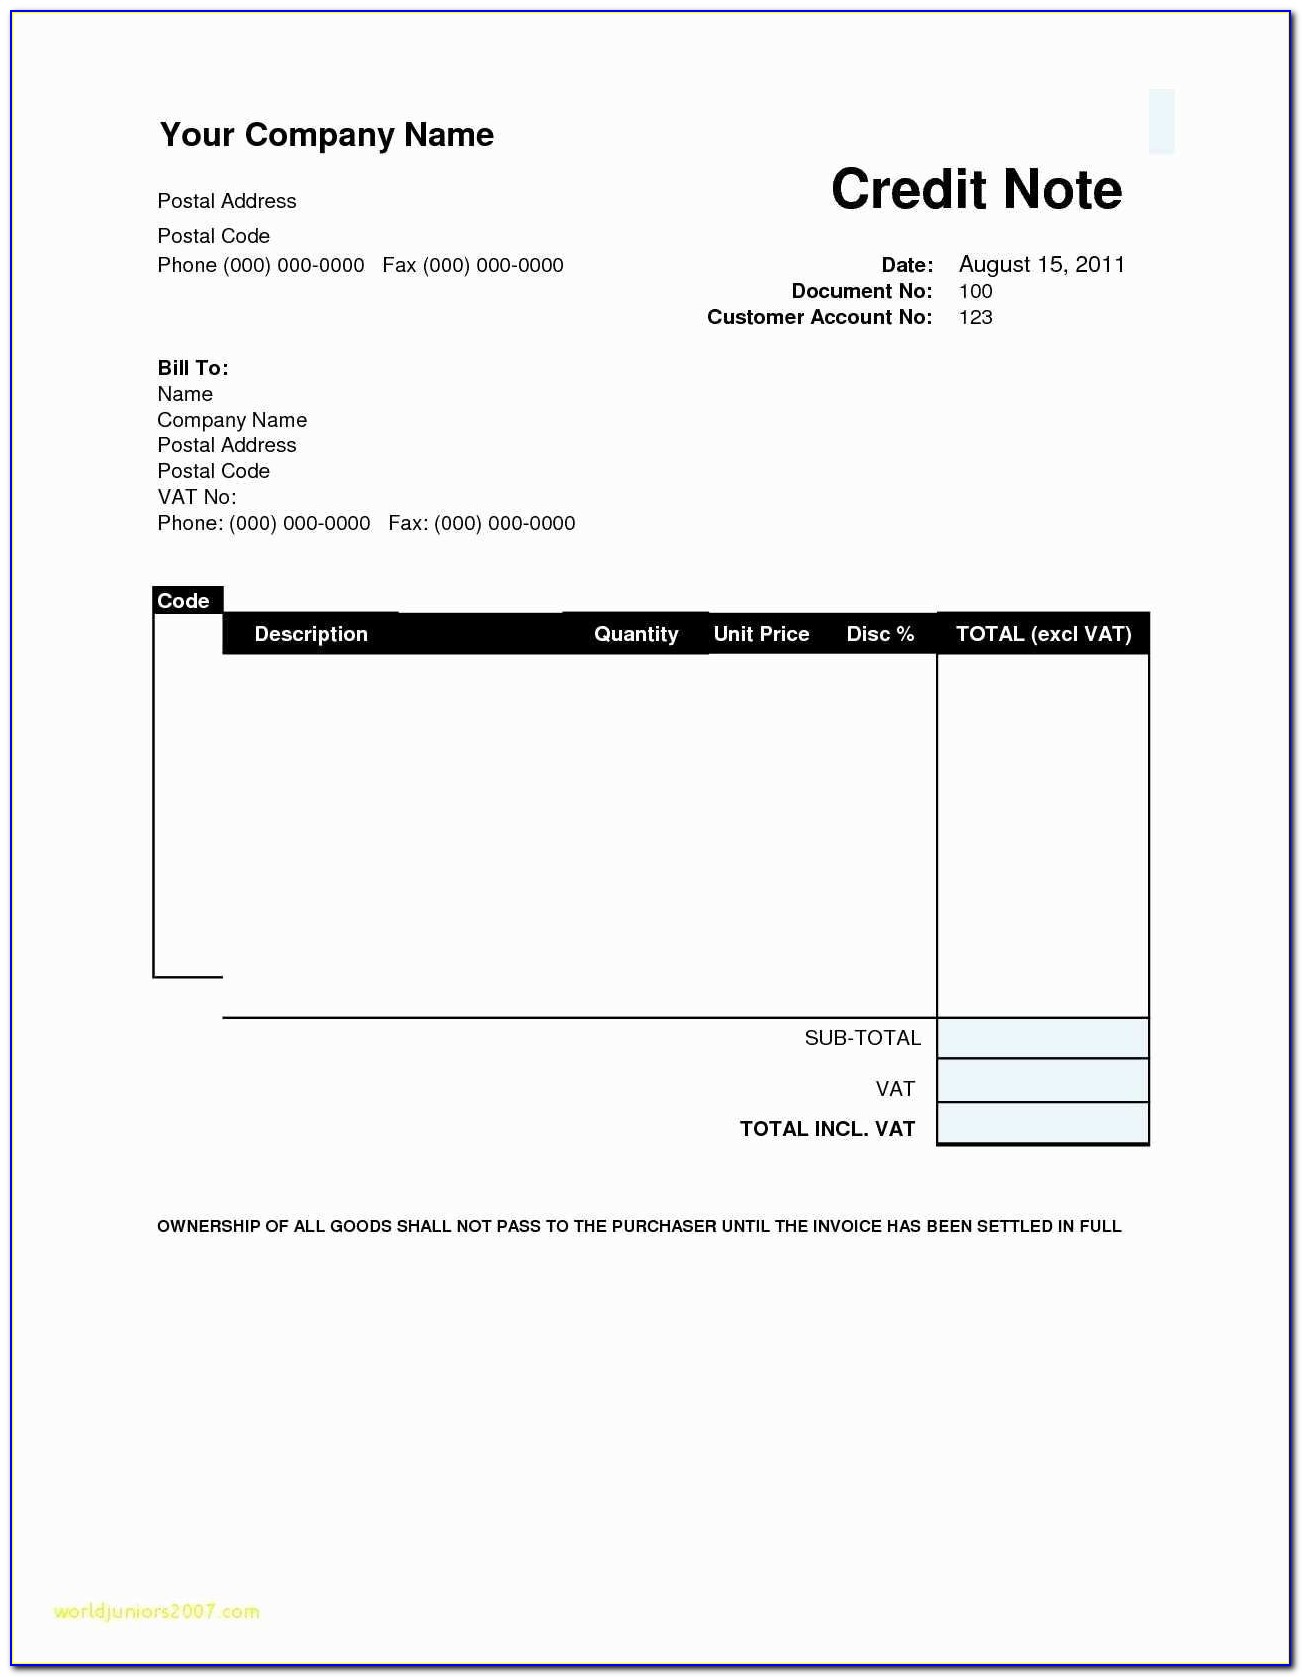 Pay Ebay Invoice With Paypal Credit